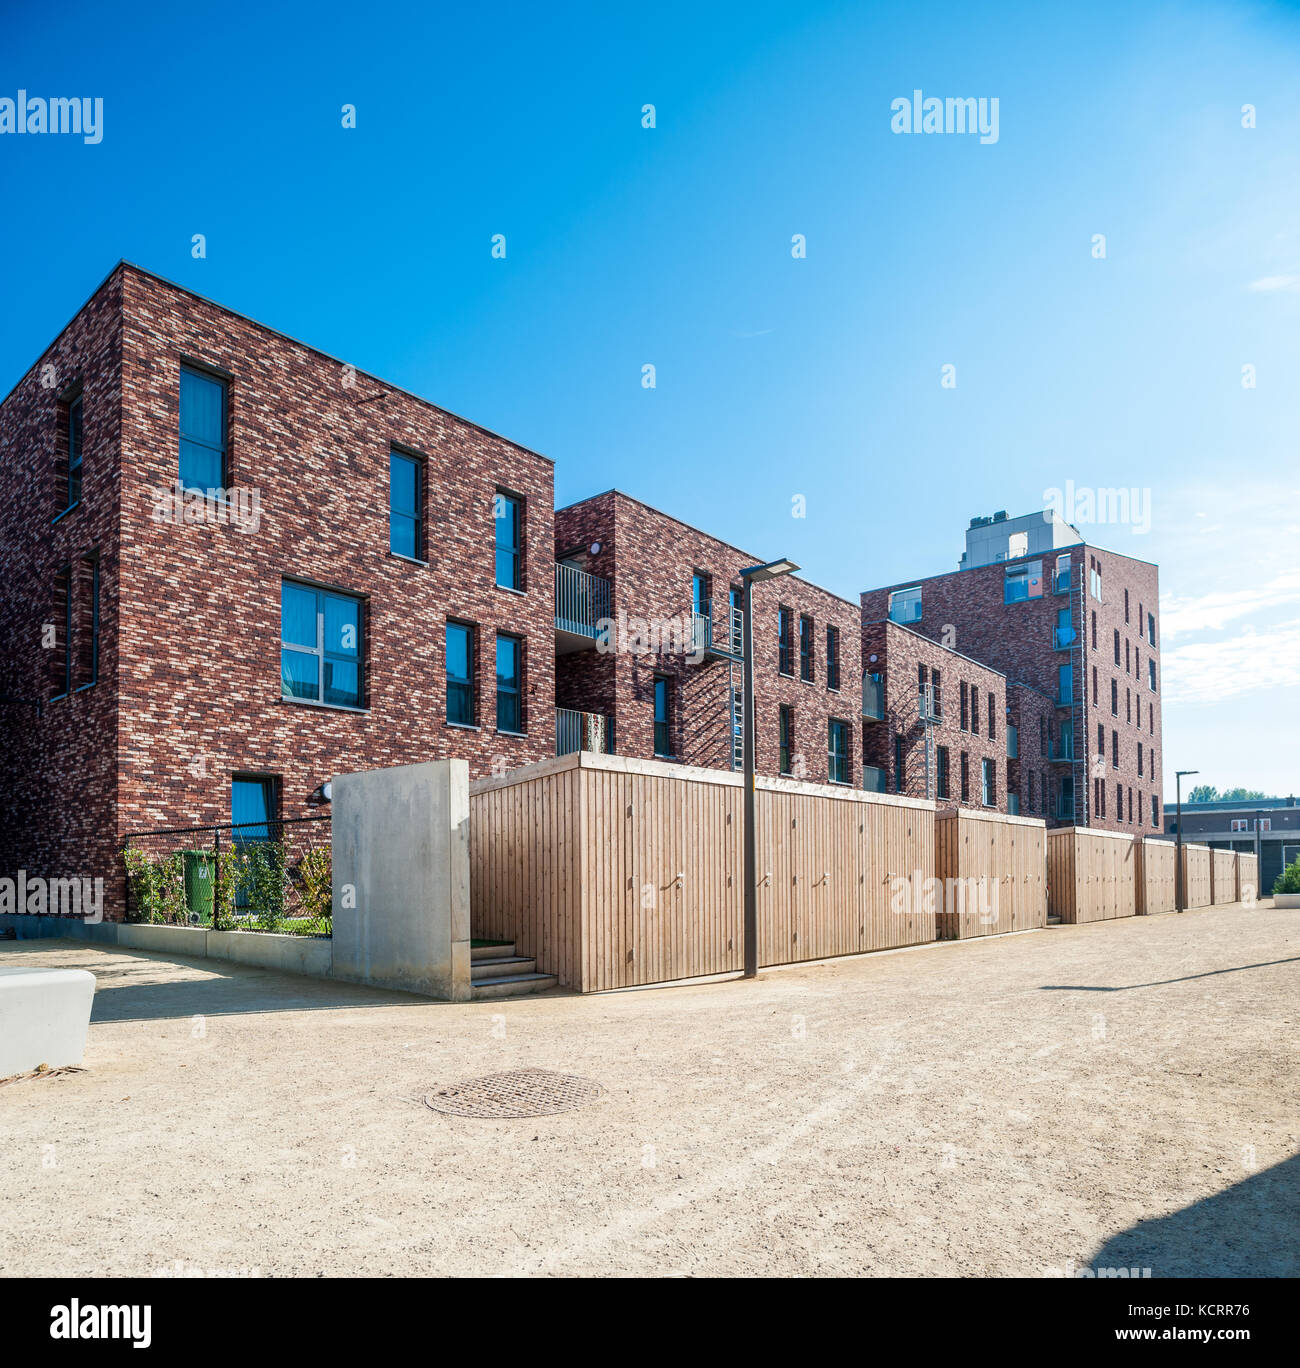 Belgium, Antwerp, residential Manchesterlaan designed by Polo architects  Stock Photo - Alamy